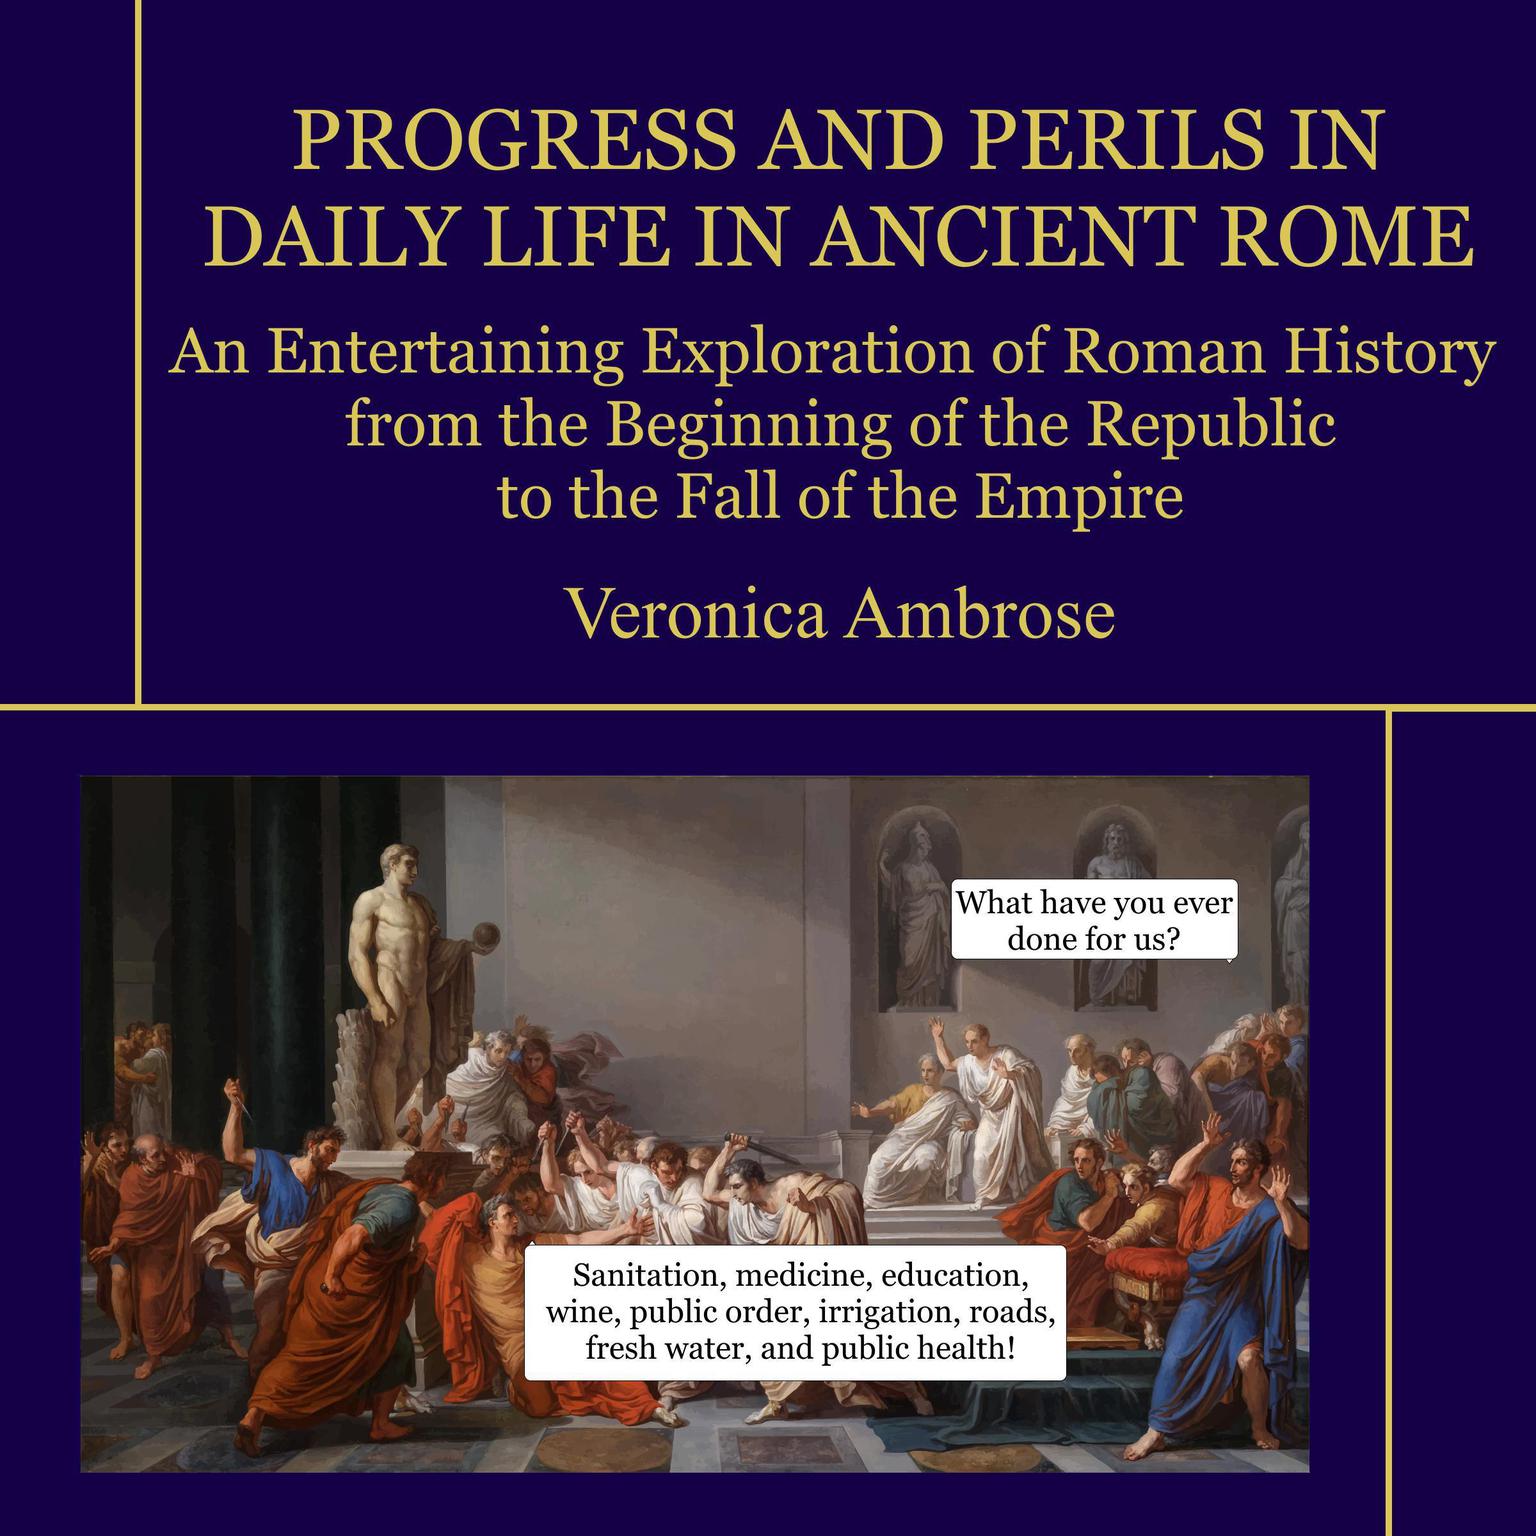 Progress and Perils in Daily Life in Ancient Rome: An Entertaining Exploration of Roman History from the Beginning of the Republic to the Fall of the Empire  Audiobook, by Veronica Ambrose